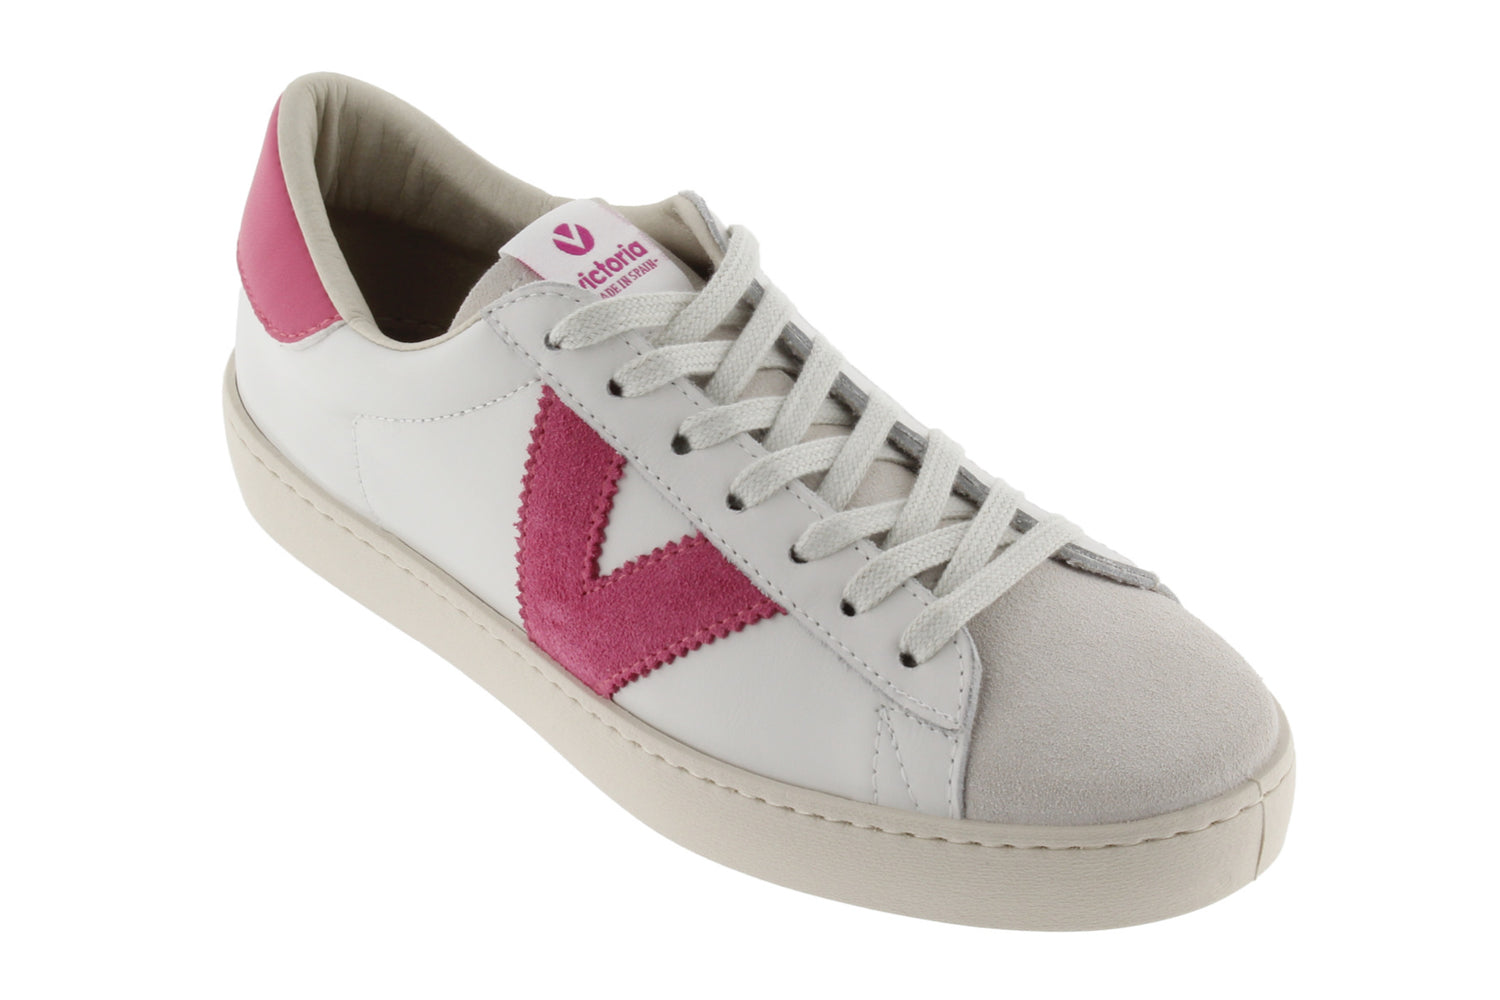 Victoria Berlin Piel 1126142 Ladies Spanish Strawberry Pink Leather Lace Up Trainers